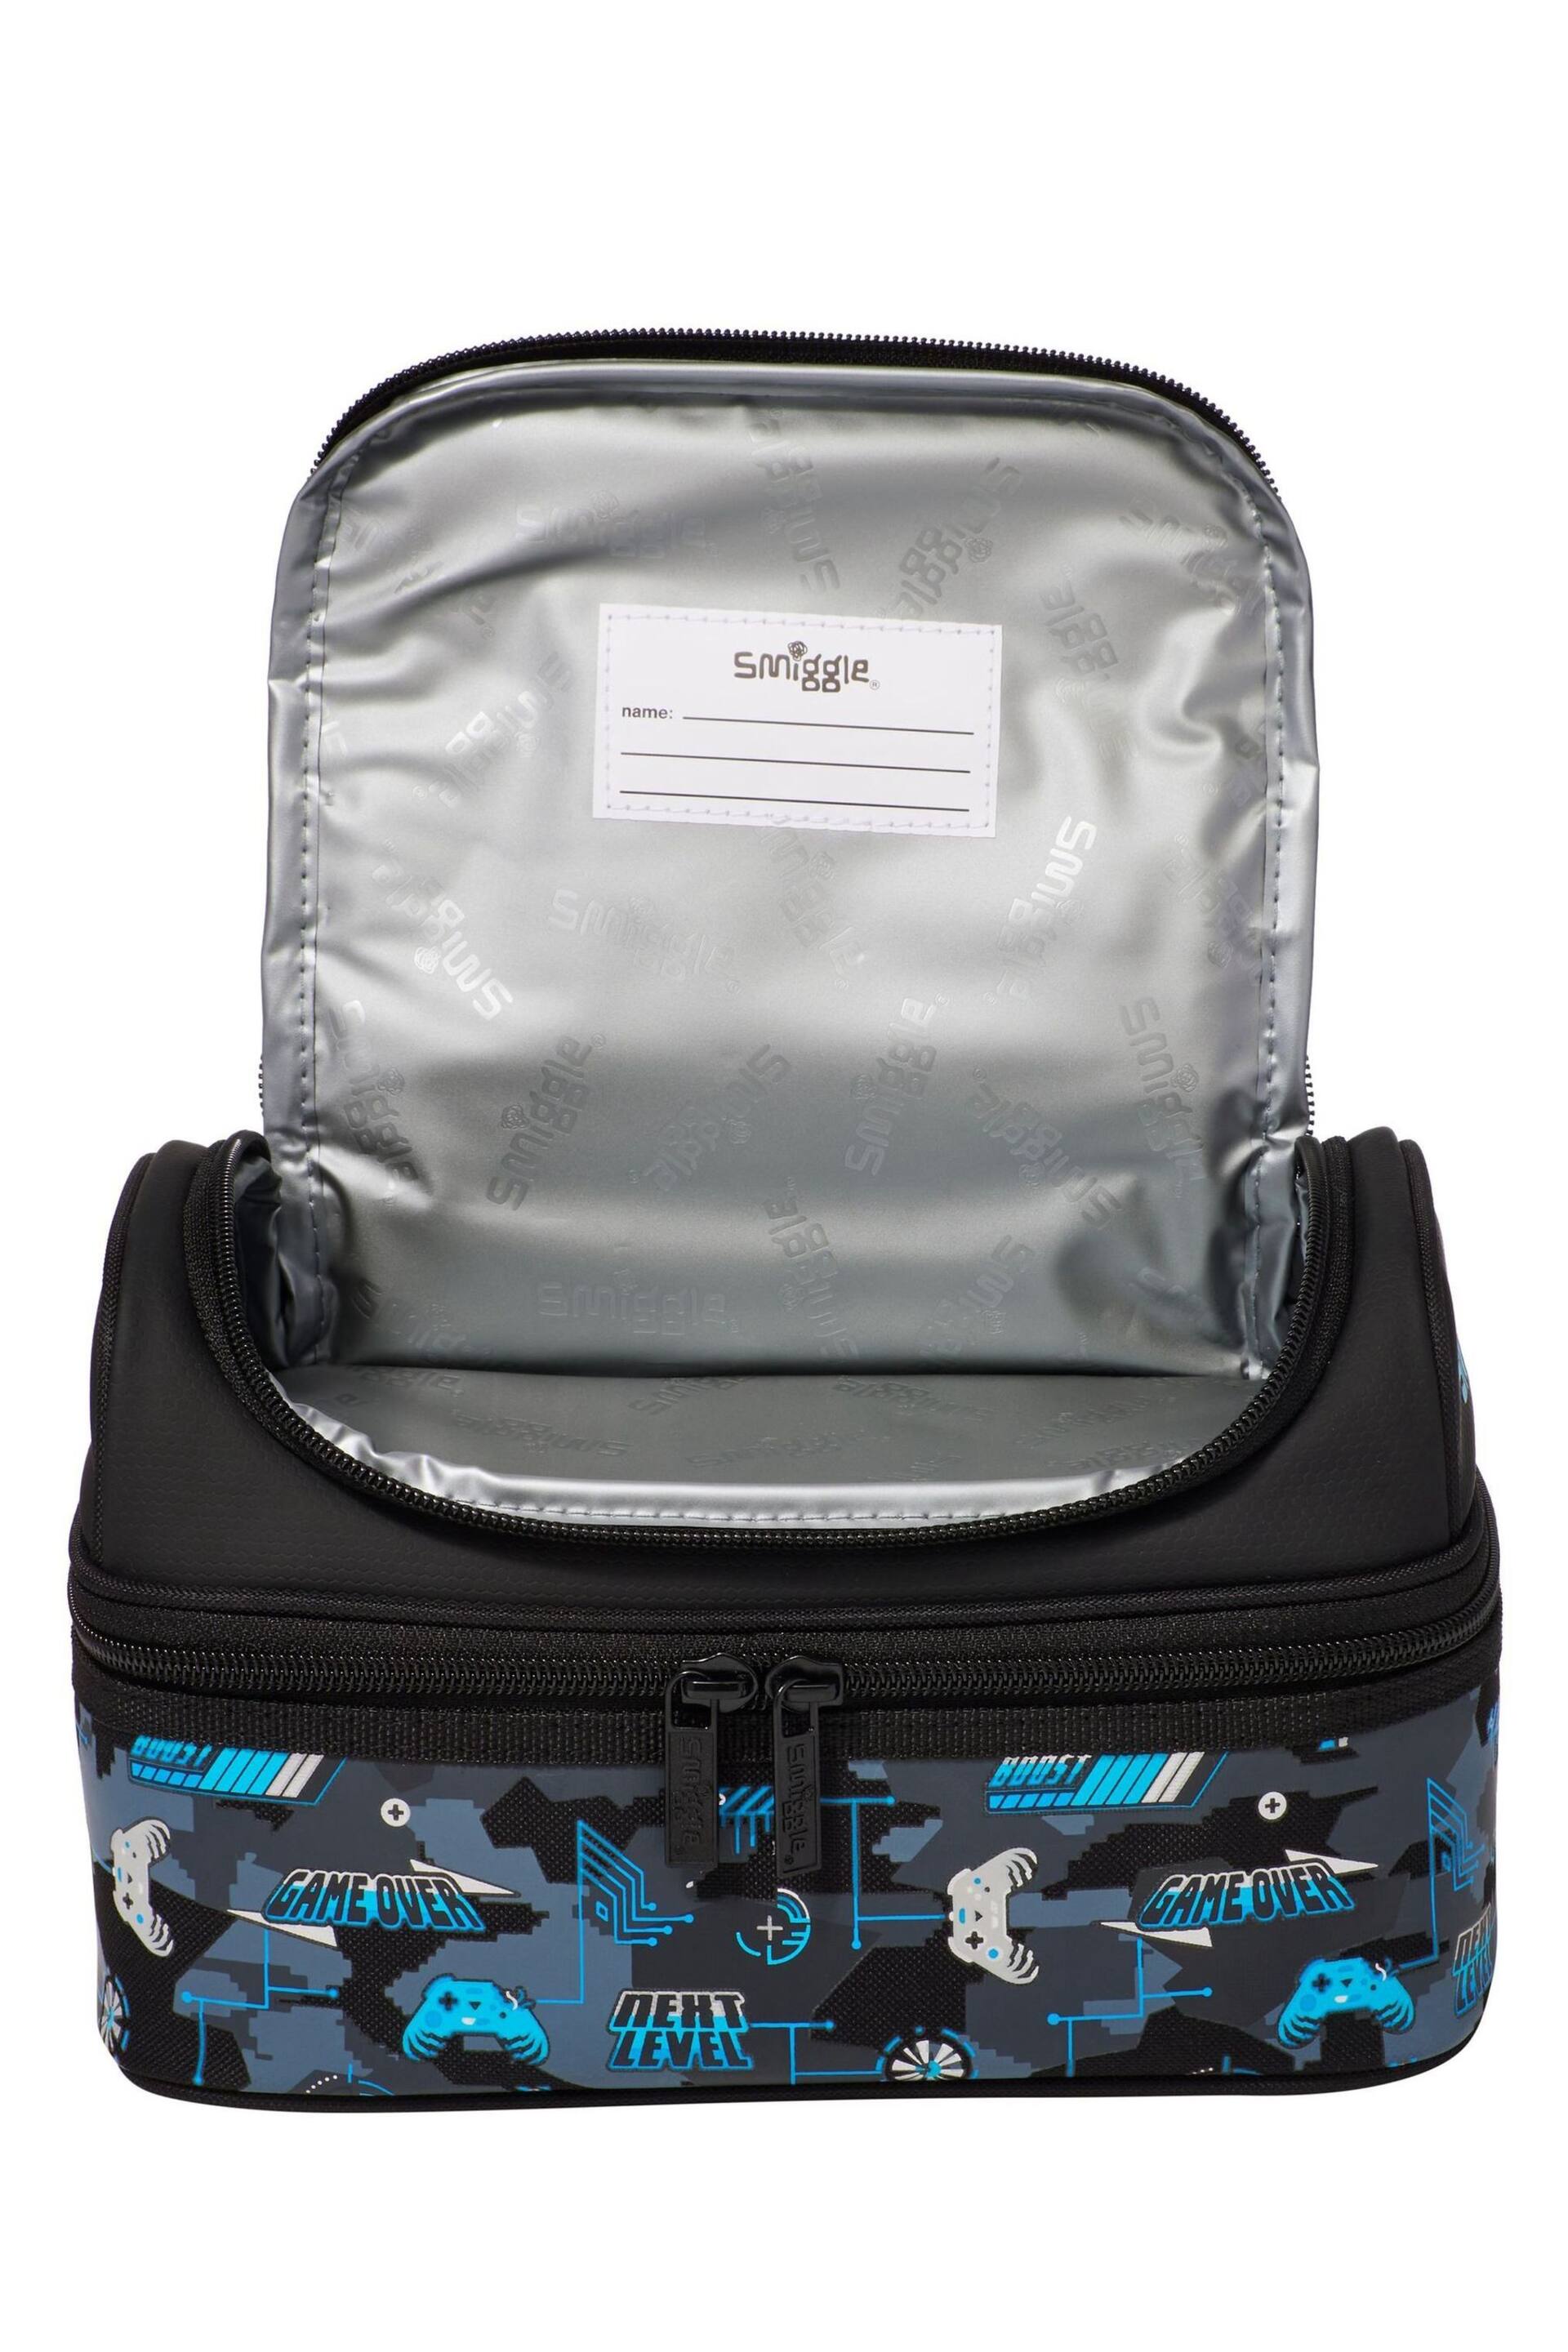 Smiggle Black Hi There Double Decker Lunchbox - Image 2 of 3